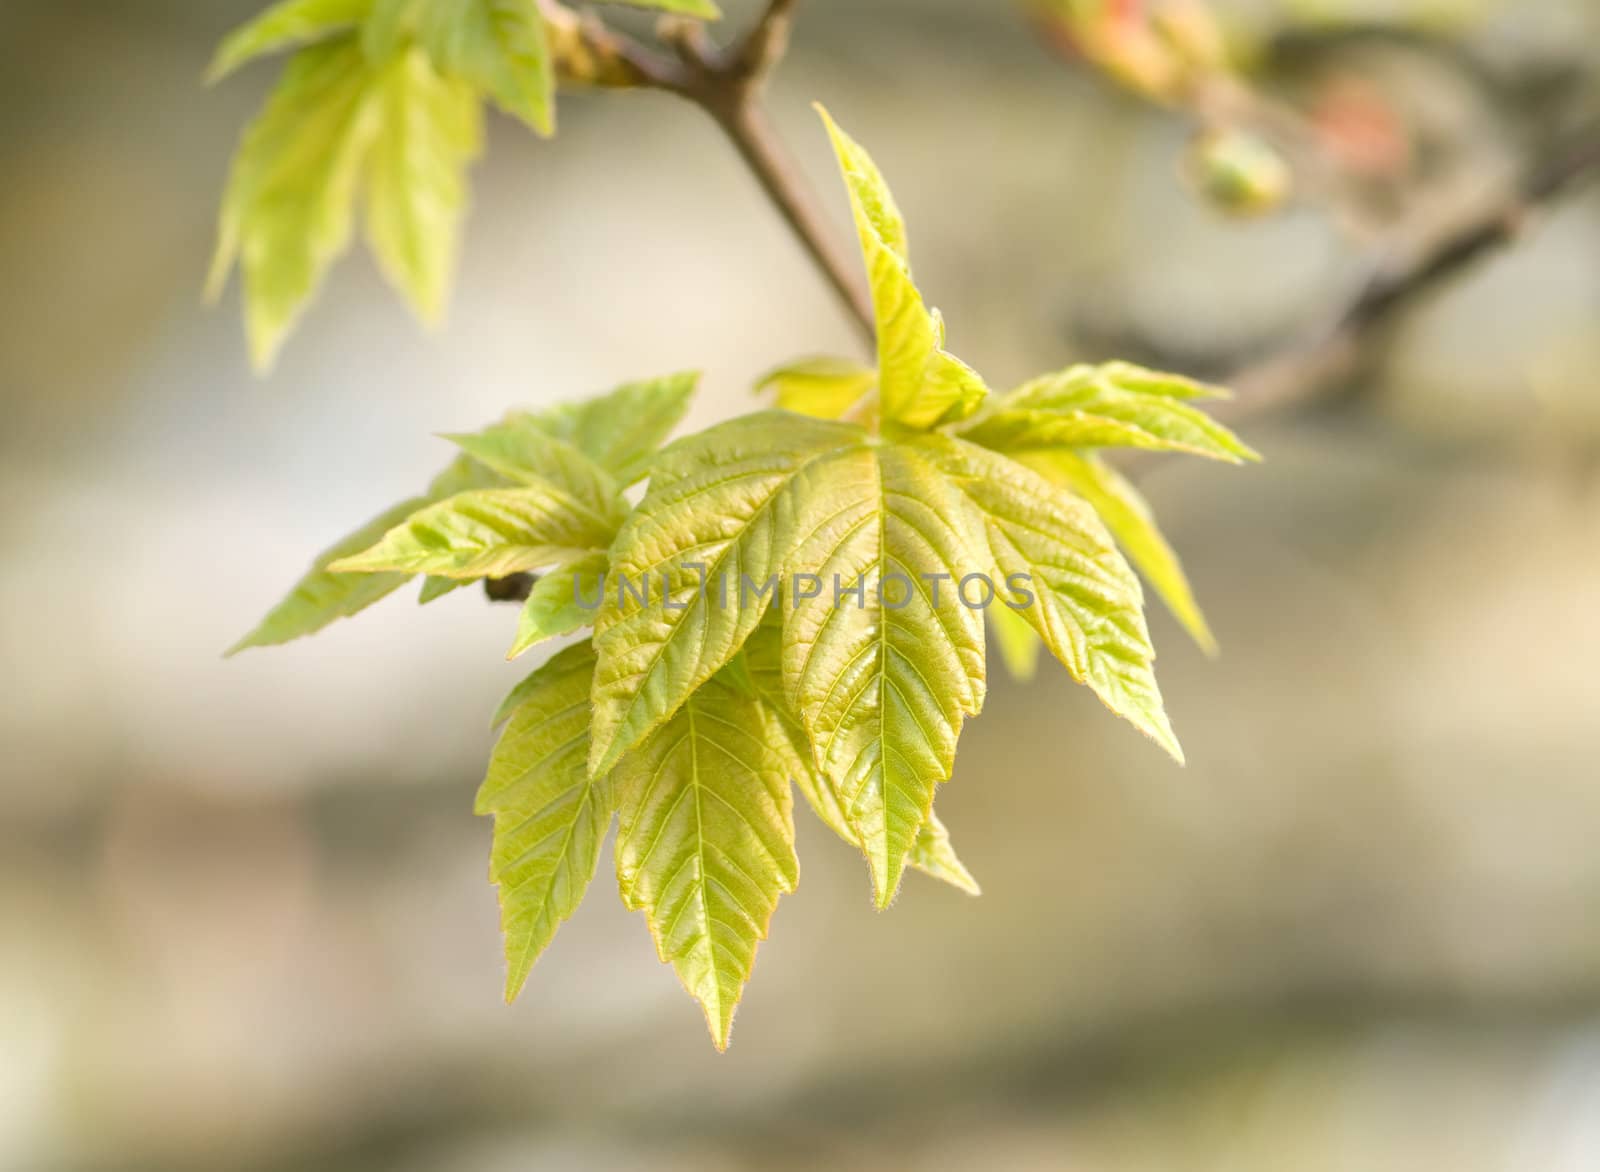 maple tree branch with spring buds and young leaves, macro